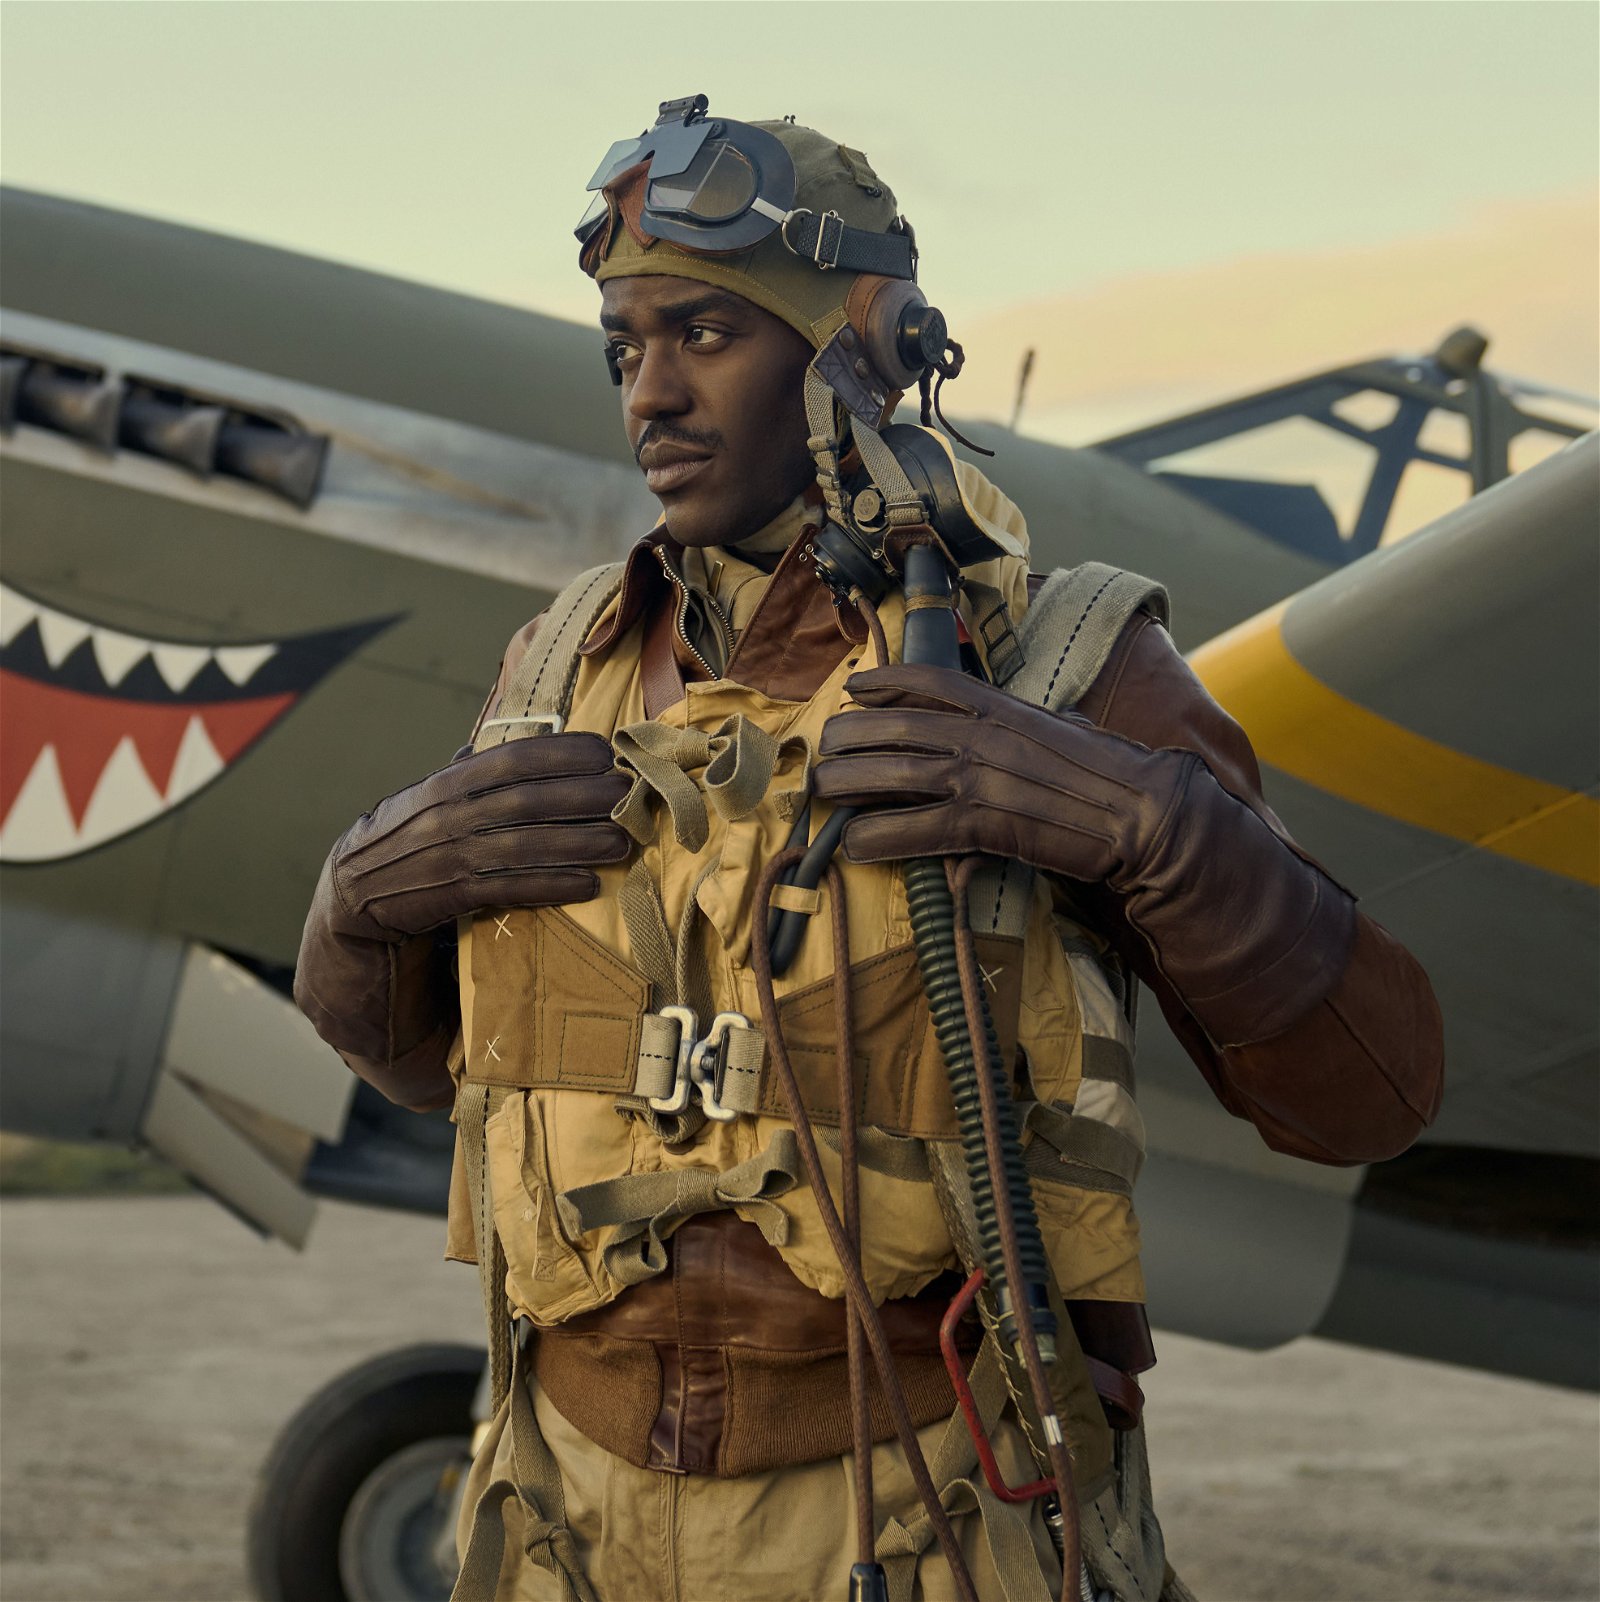 Masters of the Air Episode 8 Introduces the Legendary Tuskegee Airmen